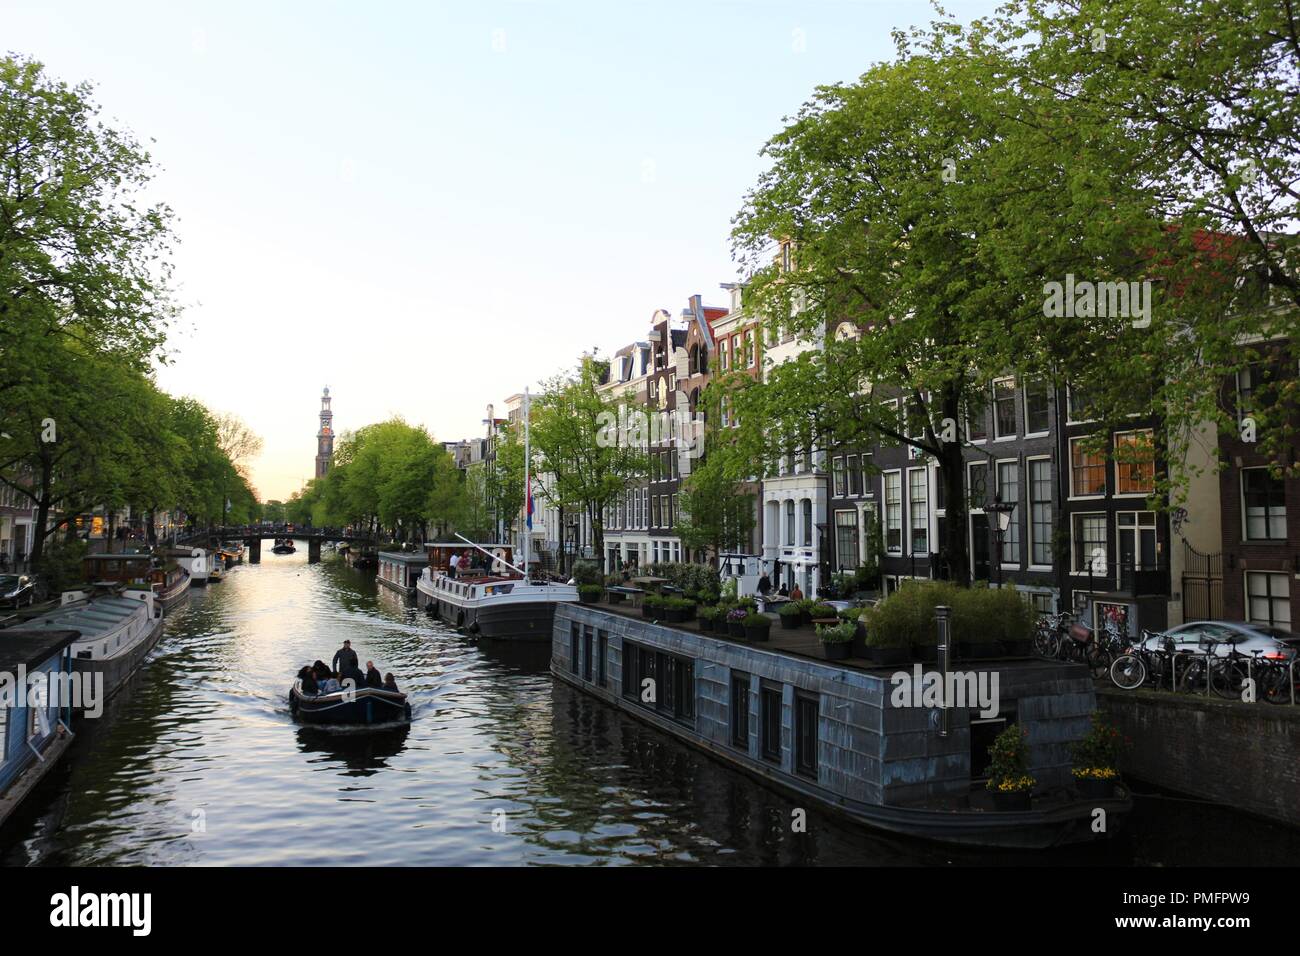 The Waalseilandsgracht canal in Amsterdam. And in the background The Montelbaanstoren Tower that has defended the city through the pass of centuries Stock Photo